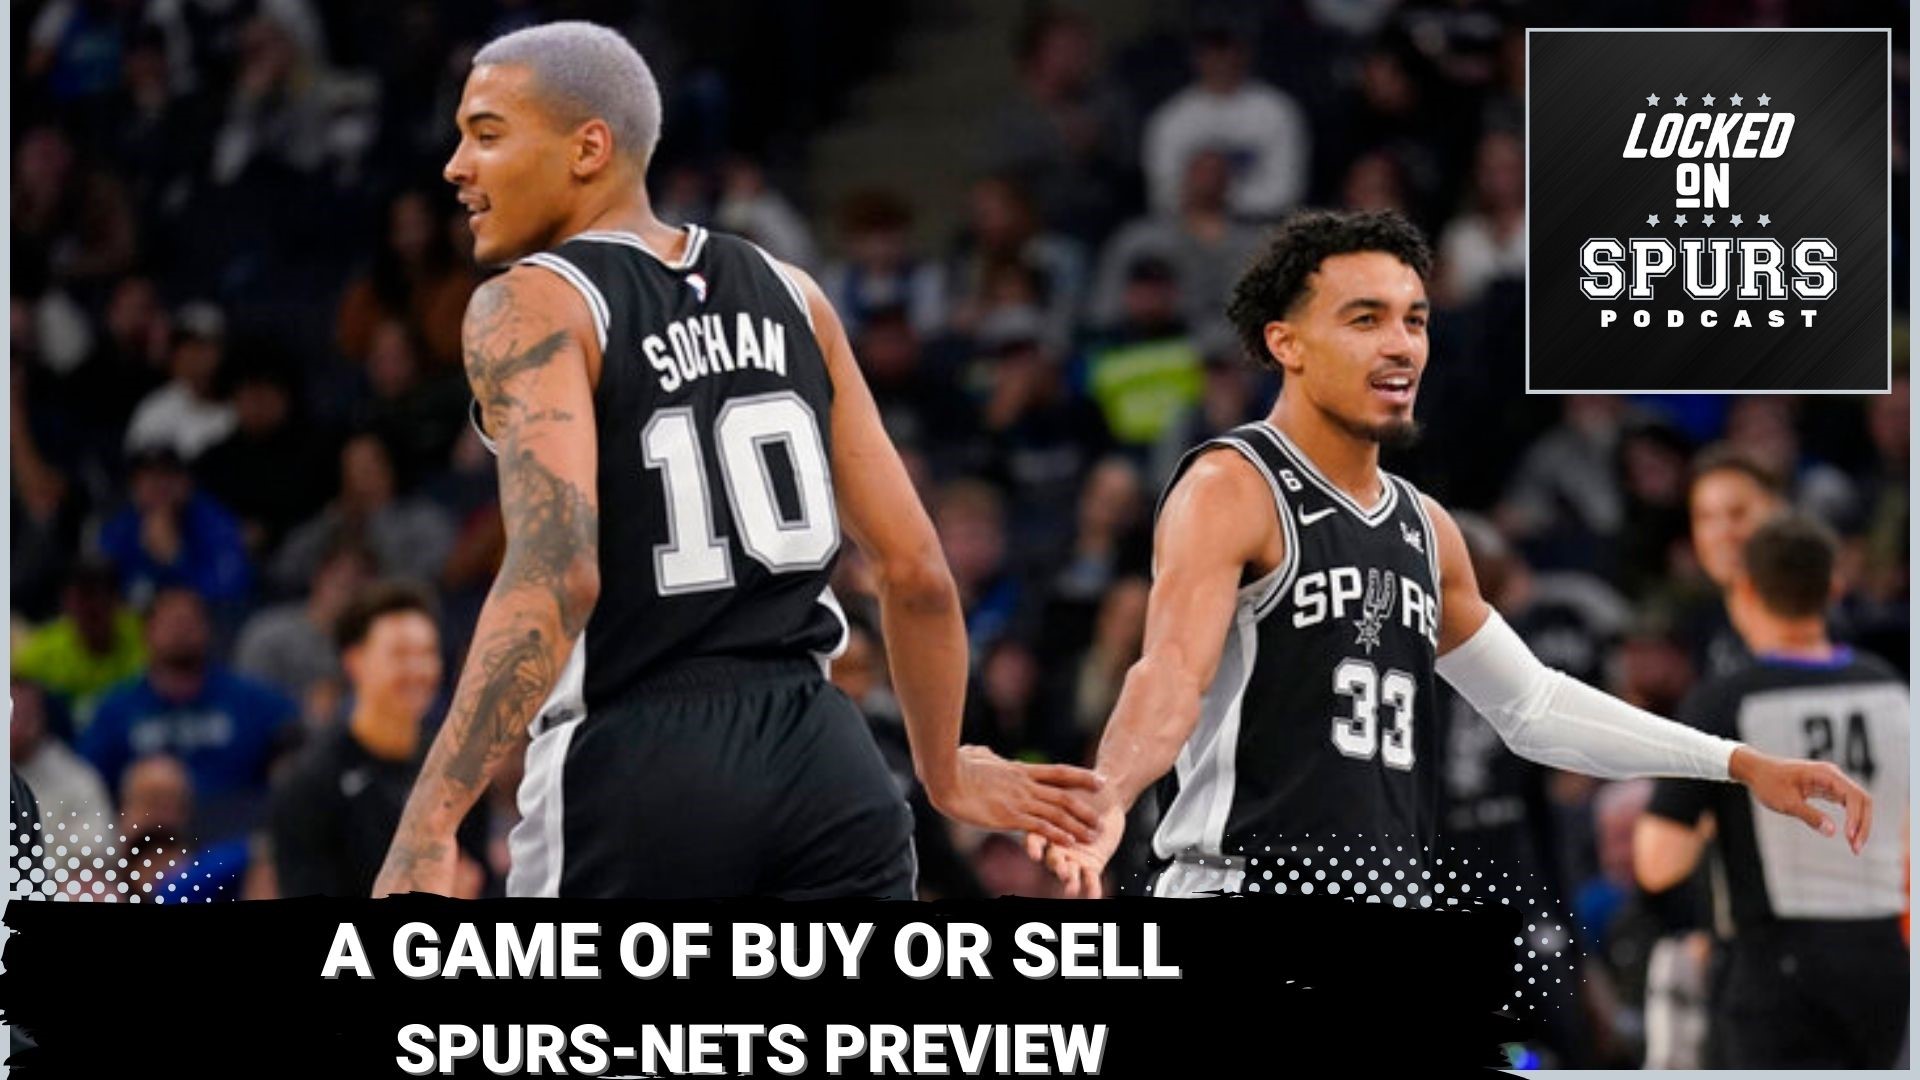 Let's talk about Spurs Week - ATXtoday